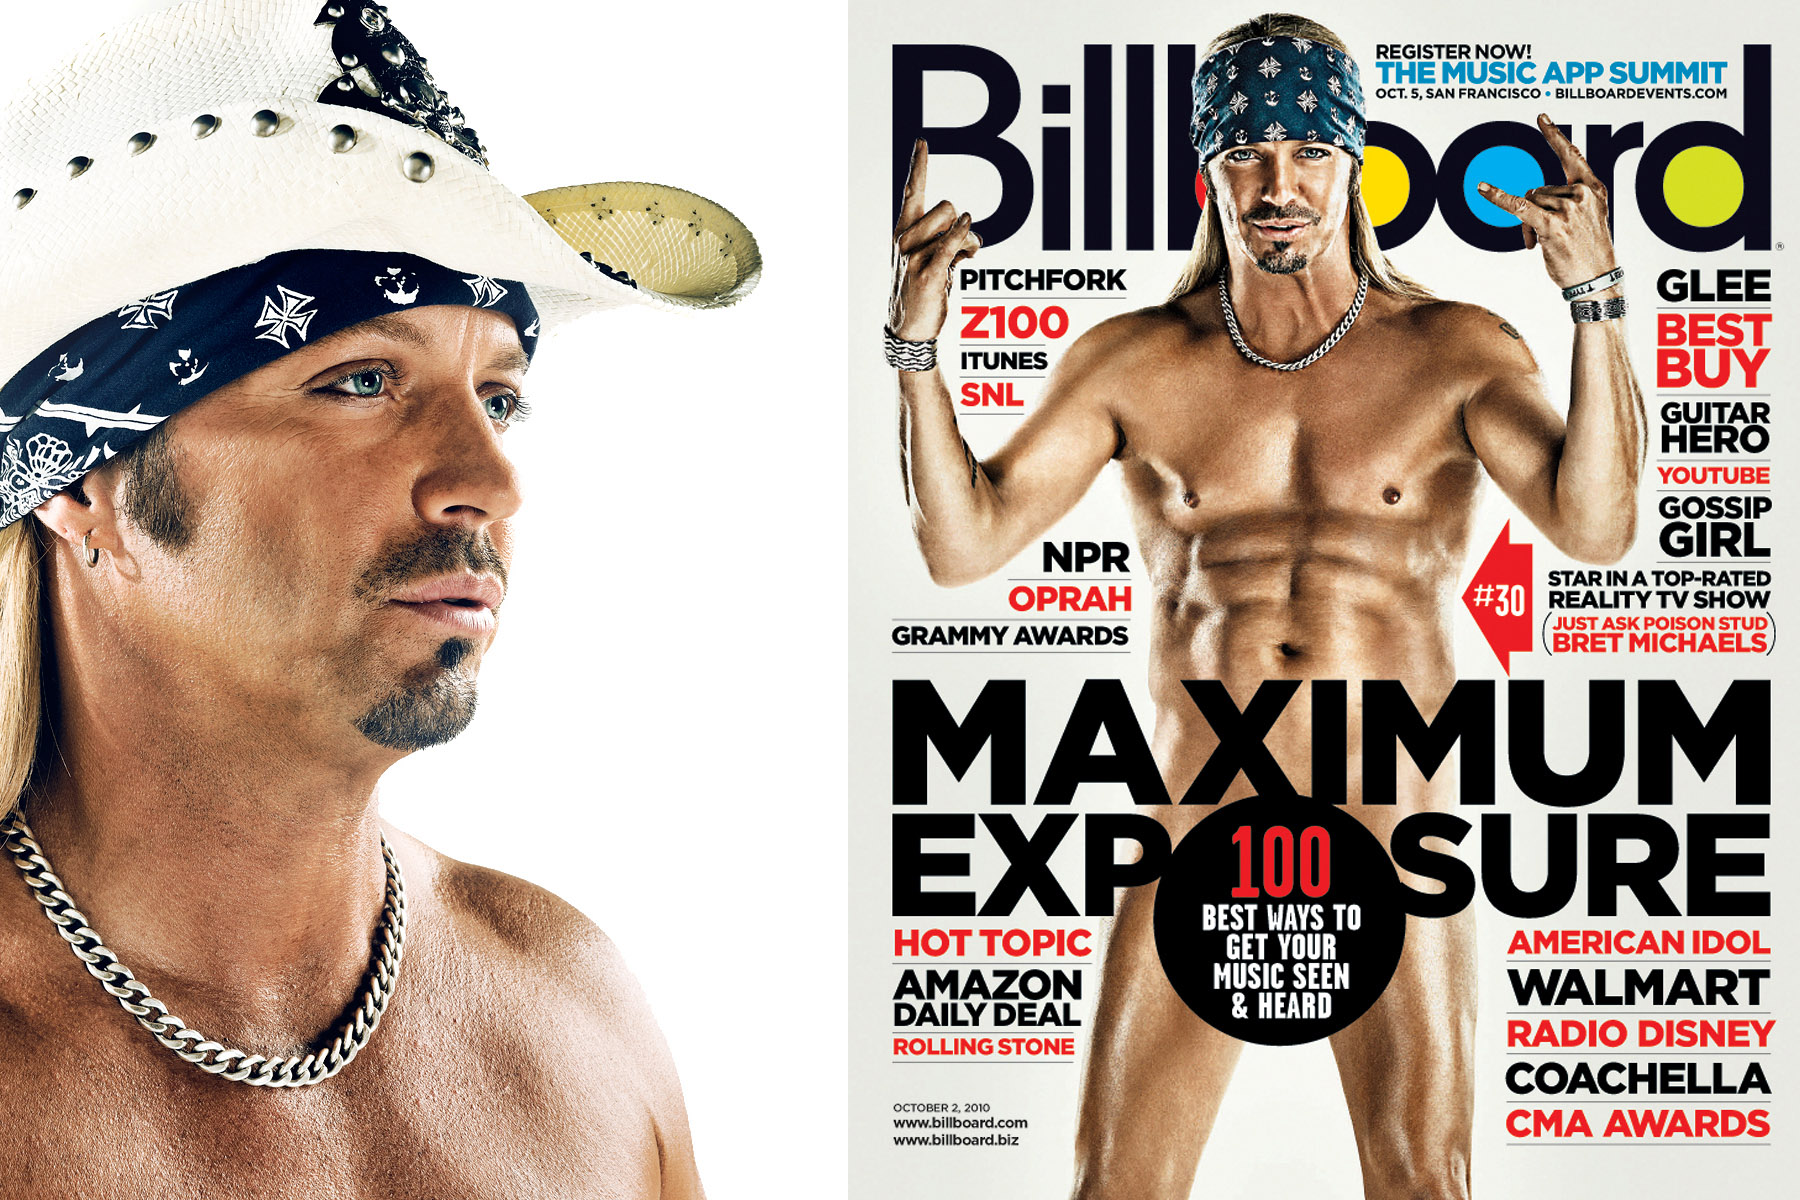 Bret Michaels photographed by Celebrity Photographer Blair Bunting